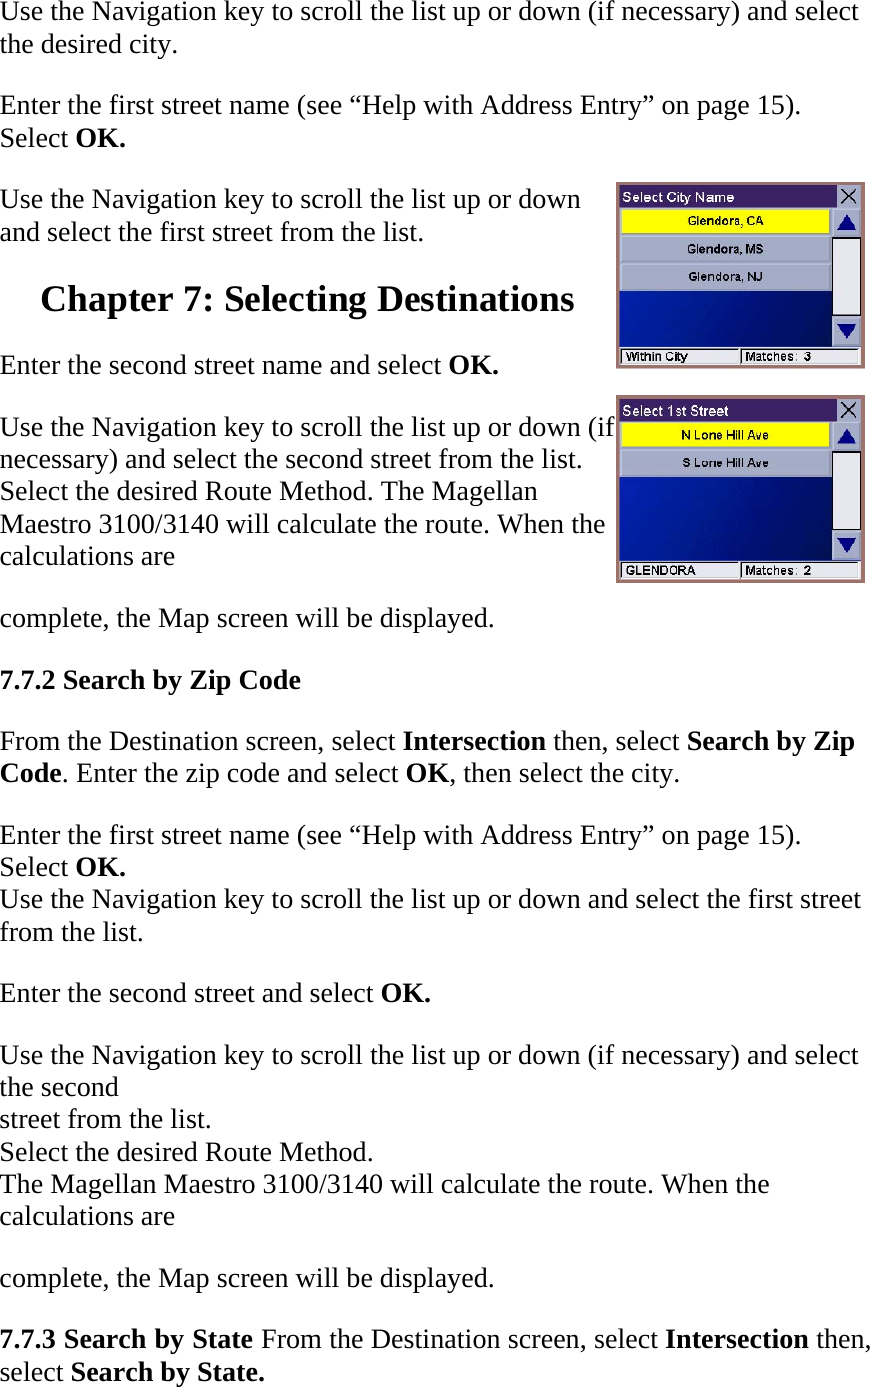 Use the Navigation key to scroll the list up or down (if necessary) and select the desired city.  Enter the first street name (see “Help with Address Entry” on page 15). Select OK.  Use the Navigation key to scroll the list up or down and select the first street from the list.  Chapter 7: Selecting Destinations  Enter the second street name and select OK.  Use the Navigation key to scroll the list up or down (if necessary) and select the second street from the list. Select the desired Route Method. The Magellan Maestro 3100/3140 will calculate the route. When the calculations are  complete, the Map screen will be displayed.  7.7.2 Search by Zip Code  From the Destination screen, select Intersection then, select Search by Zip  Code. Enter the zip code and select OK, then select the city.  Enter the first street name (see “Help with Address Entry” on page 15).  Select OK. Use the Navigation key to scroll the list up or down and select the first street  from the list.  Enter the second street and select OK.  Use the Navigation key to scroll the list up or down (if necessary) and select  the second  street from the list.  Select the desired Route Method.  The Magellan Maestro 3100/3140 will calculate the route. When the  calculations are  complete, the Map screen will be displayed. 7.7.3 Search by State From the Destination screen, select Intersection then, select Search by State.  